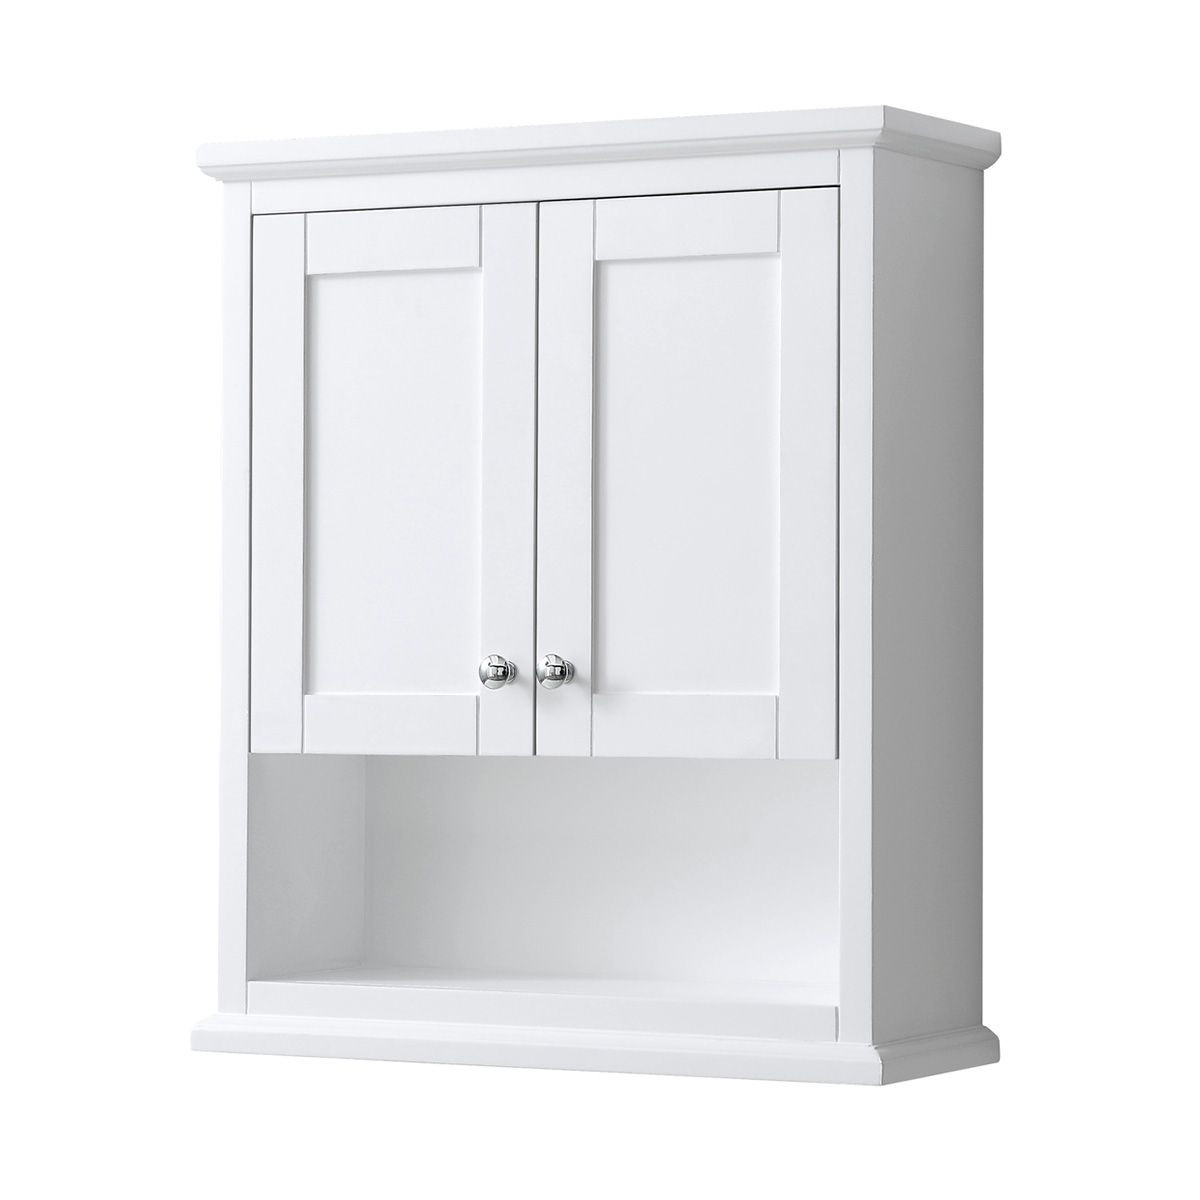 Wall Mounted Bathroom Cabinets
 Wall Mounted Bathroom Storage Cabinet in White